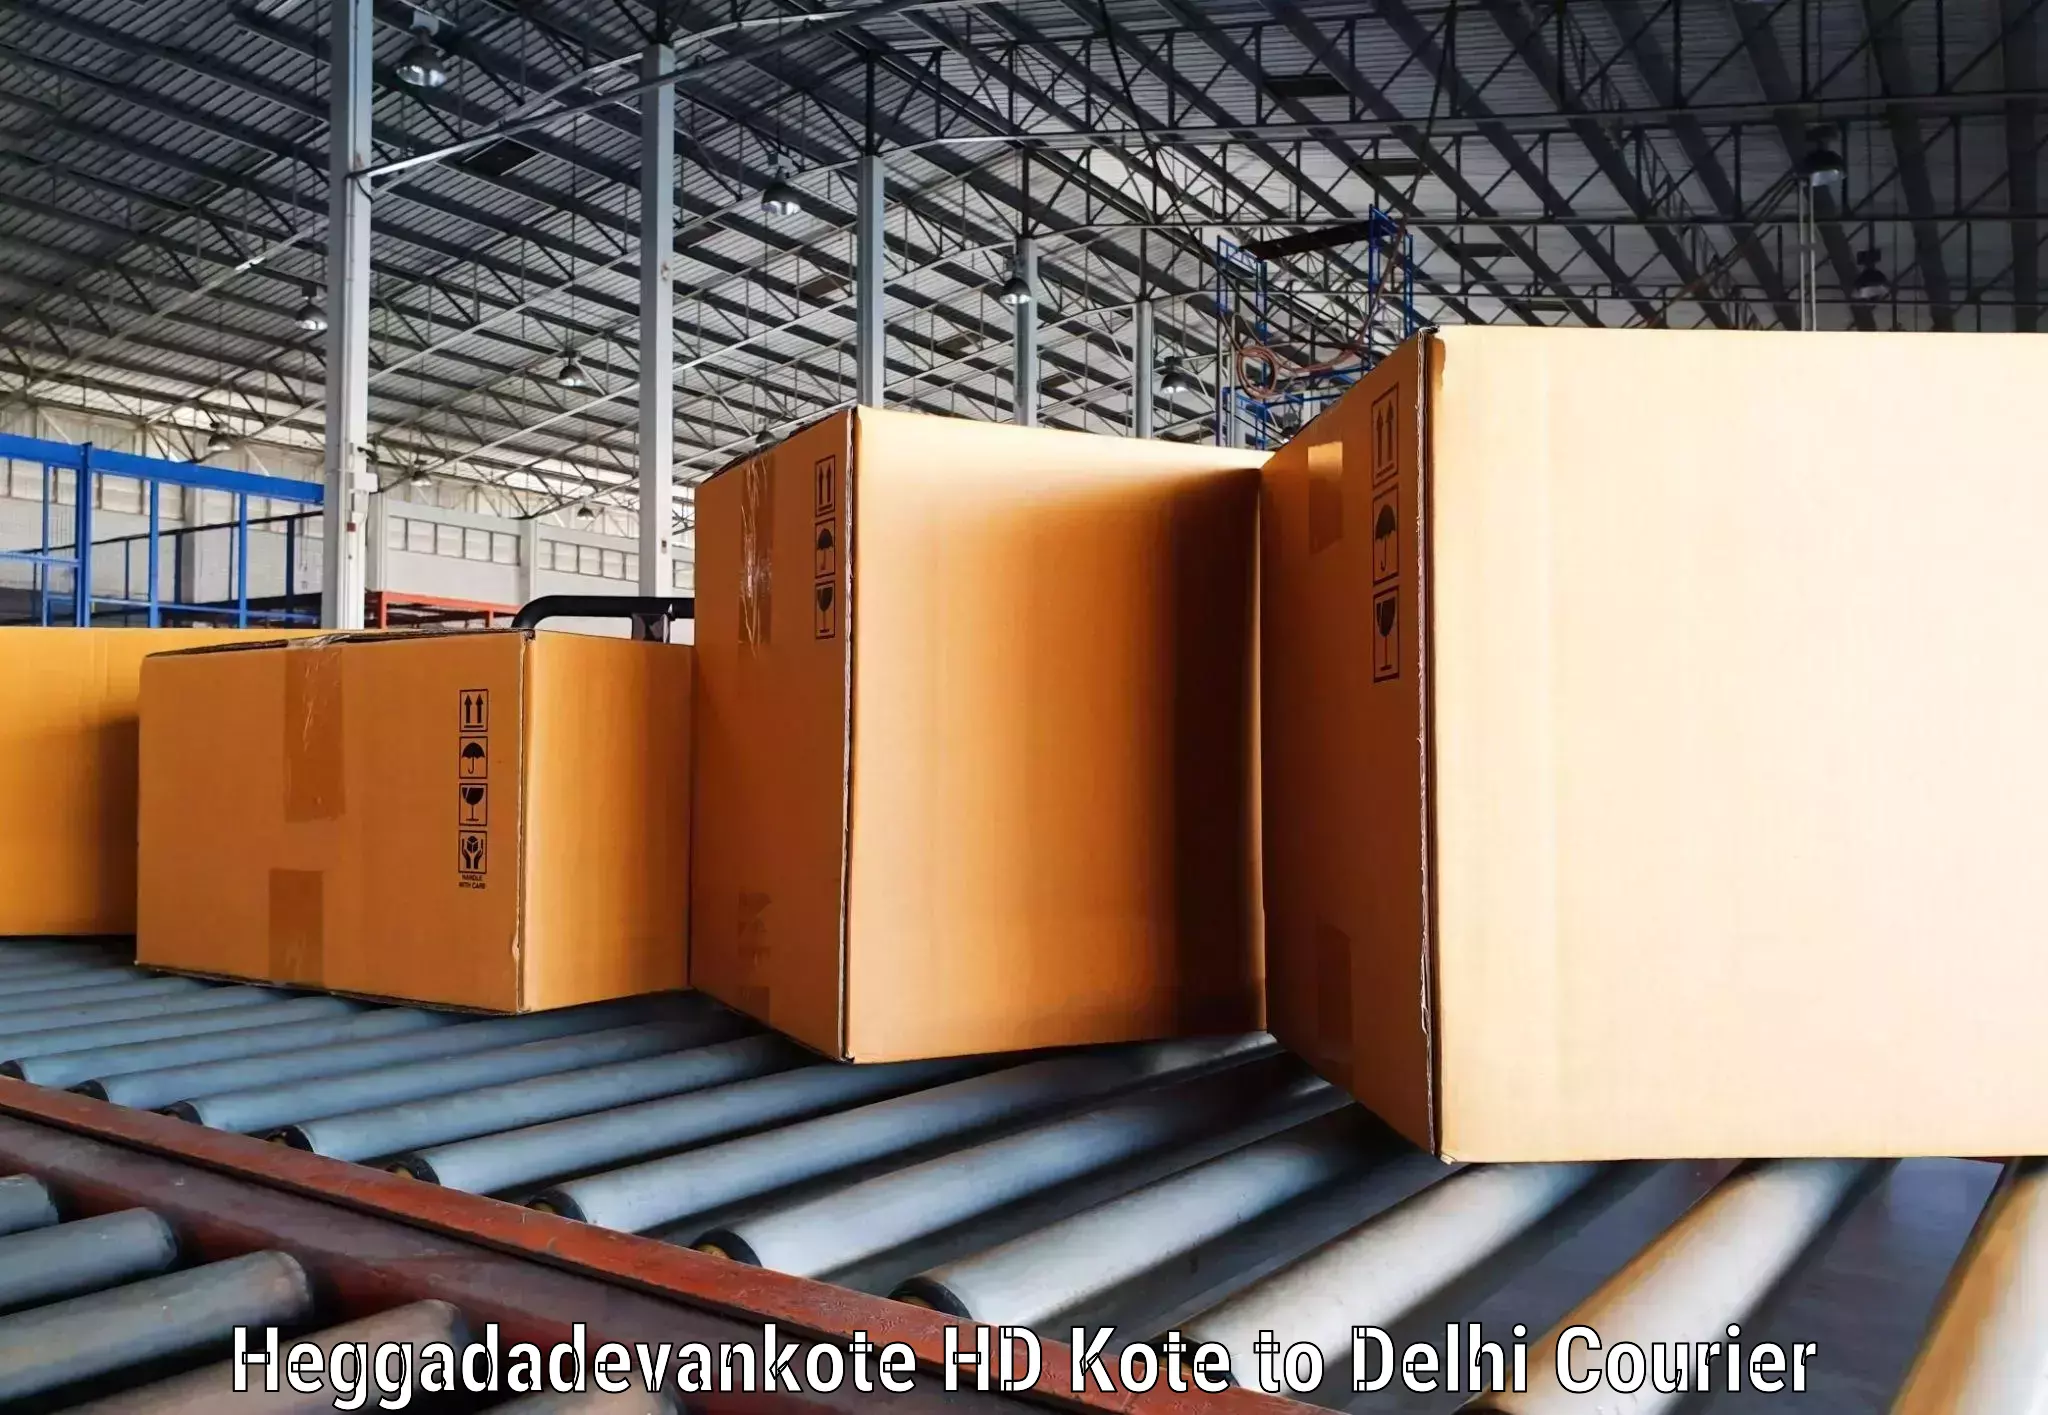 Full-service courier options Heggadadevankote HD Kote to NCR